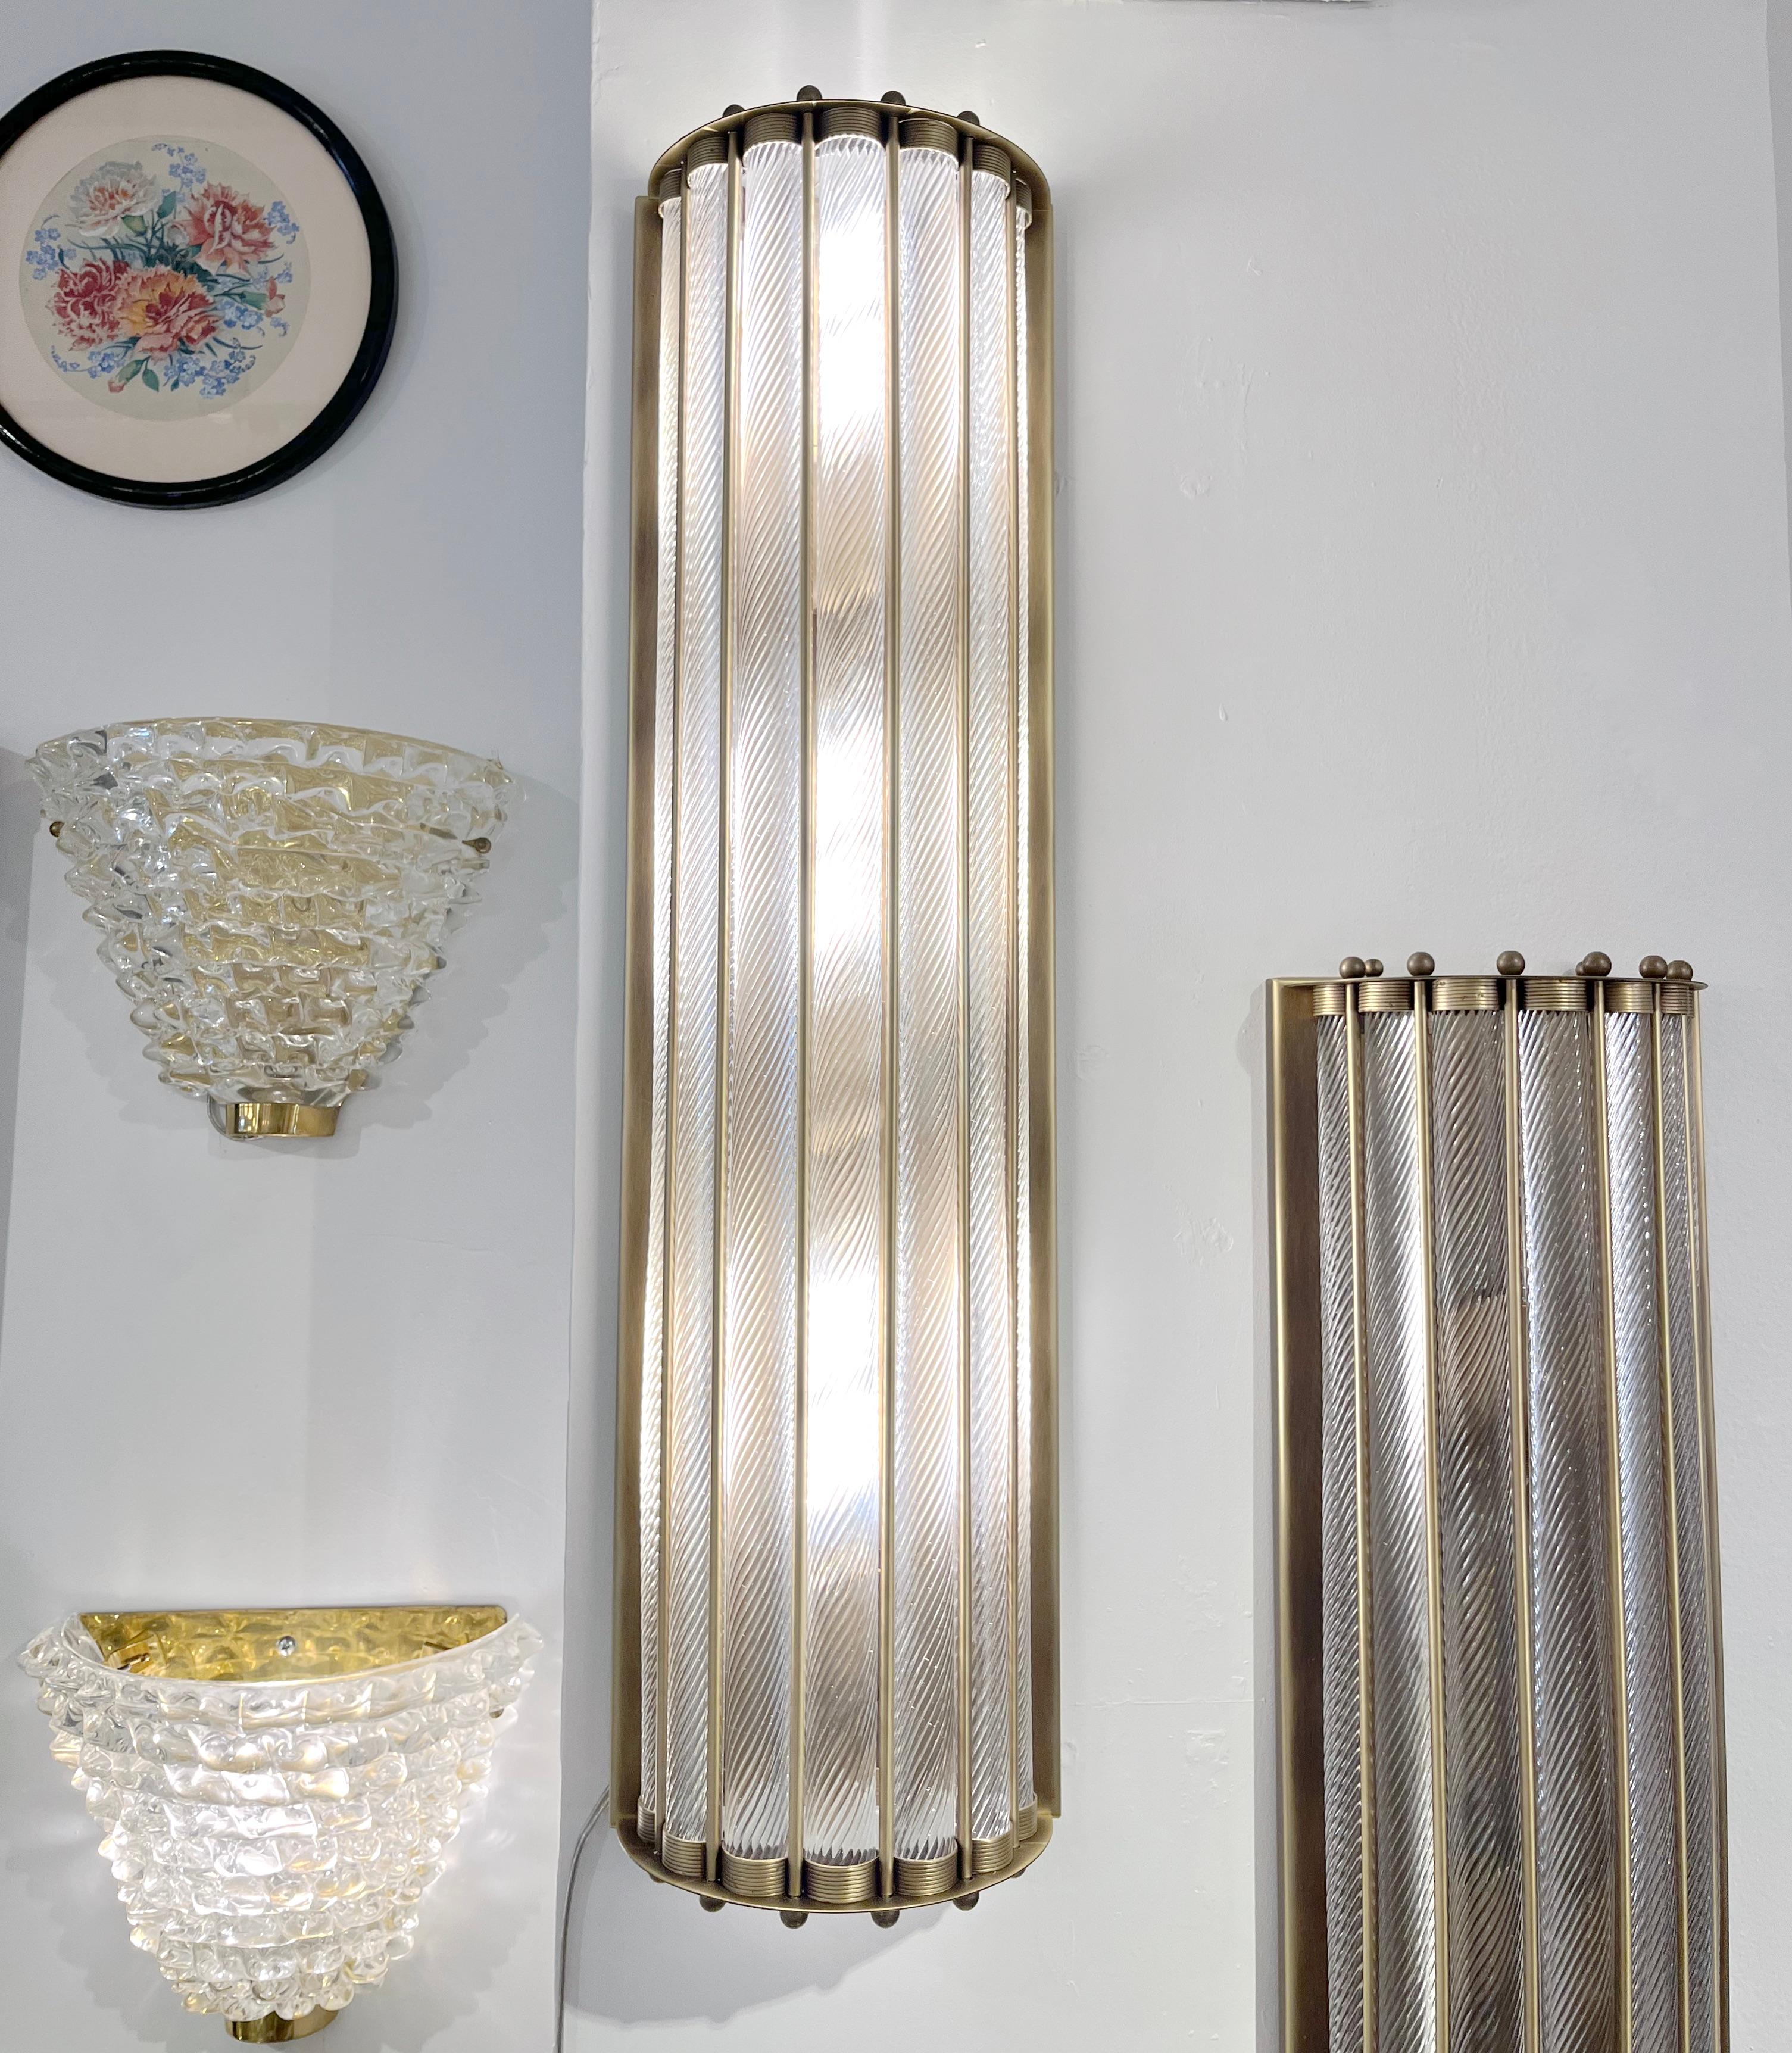 Contemporary customizable Italian Art Deco Design pair of semi-circular wall lights, entirely handcrafted in Italy, with an antique bronze finish. The nicely scalloped airy brass structure supports crystal clear Murano glass rods worked with the